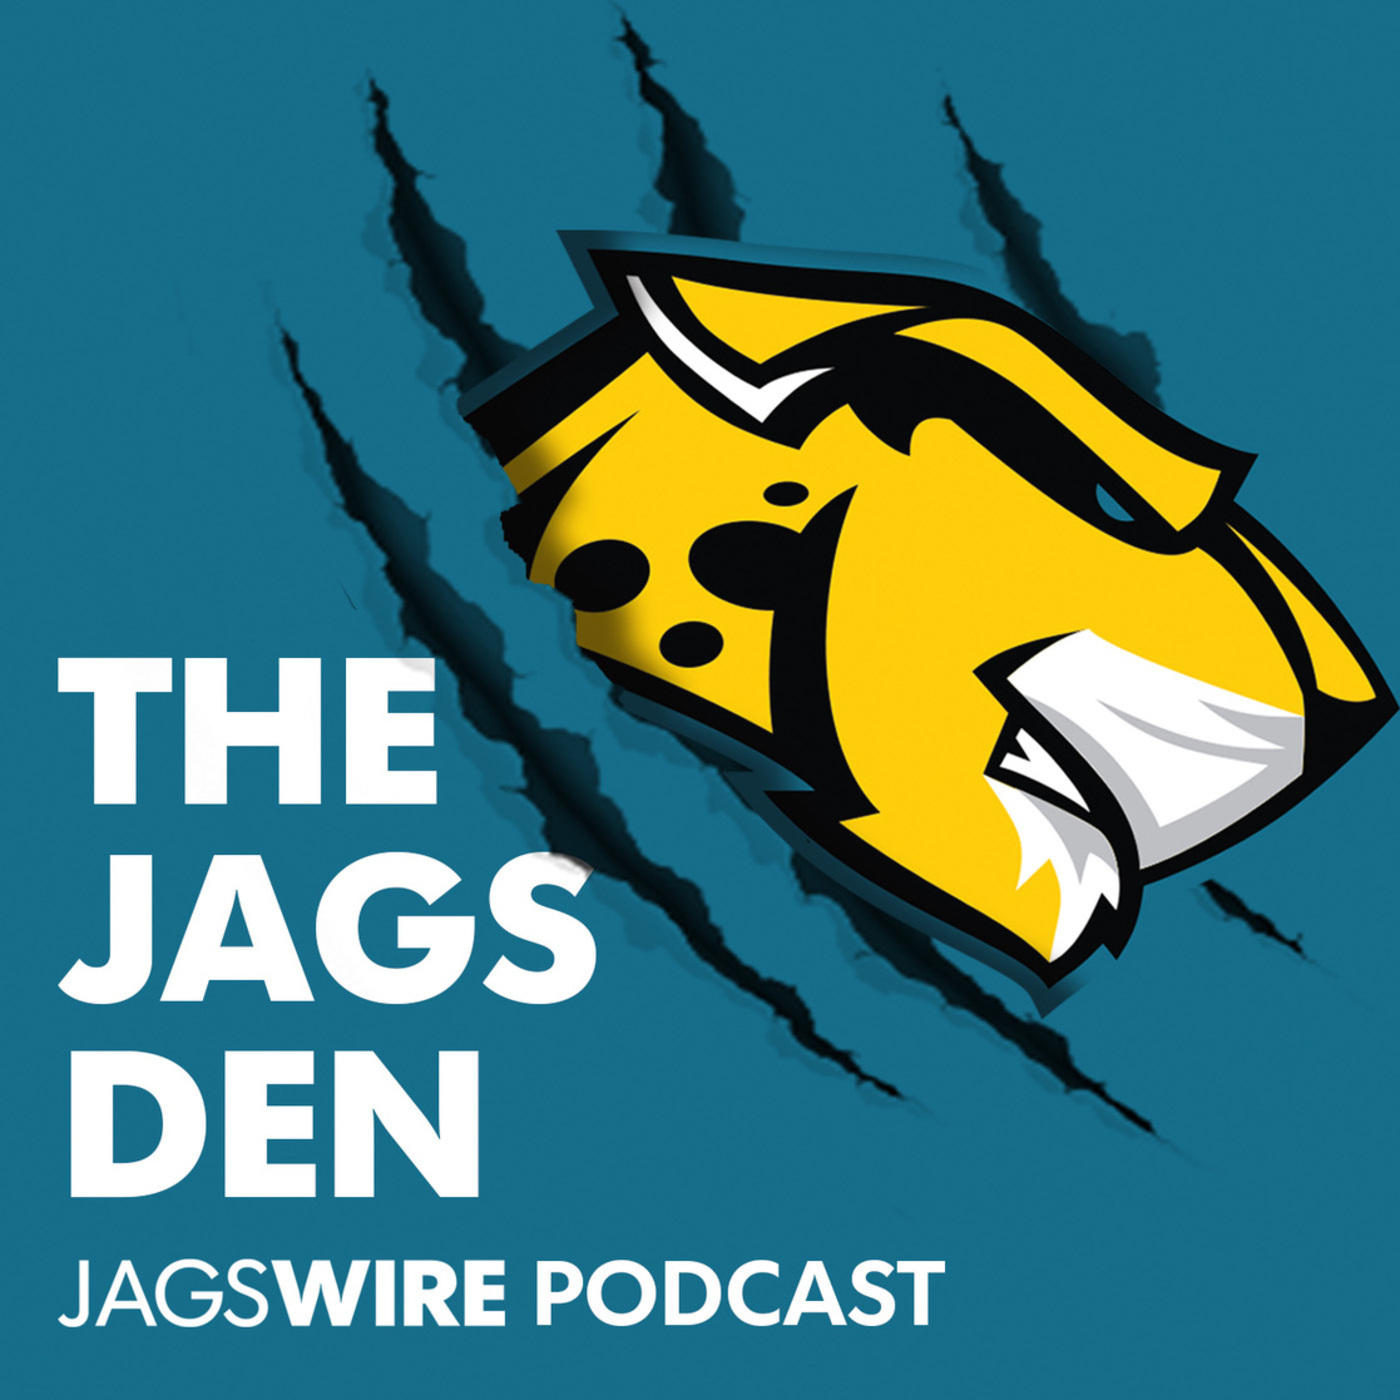 Jags Den Podcast Ep. 14: Discussions on new uniforms, tarp removal, potential Sports Complex, Kirk Cousins report and more!